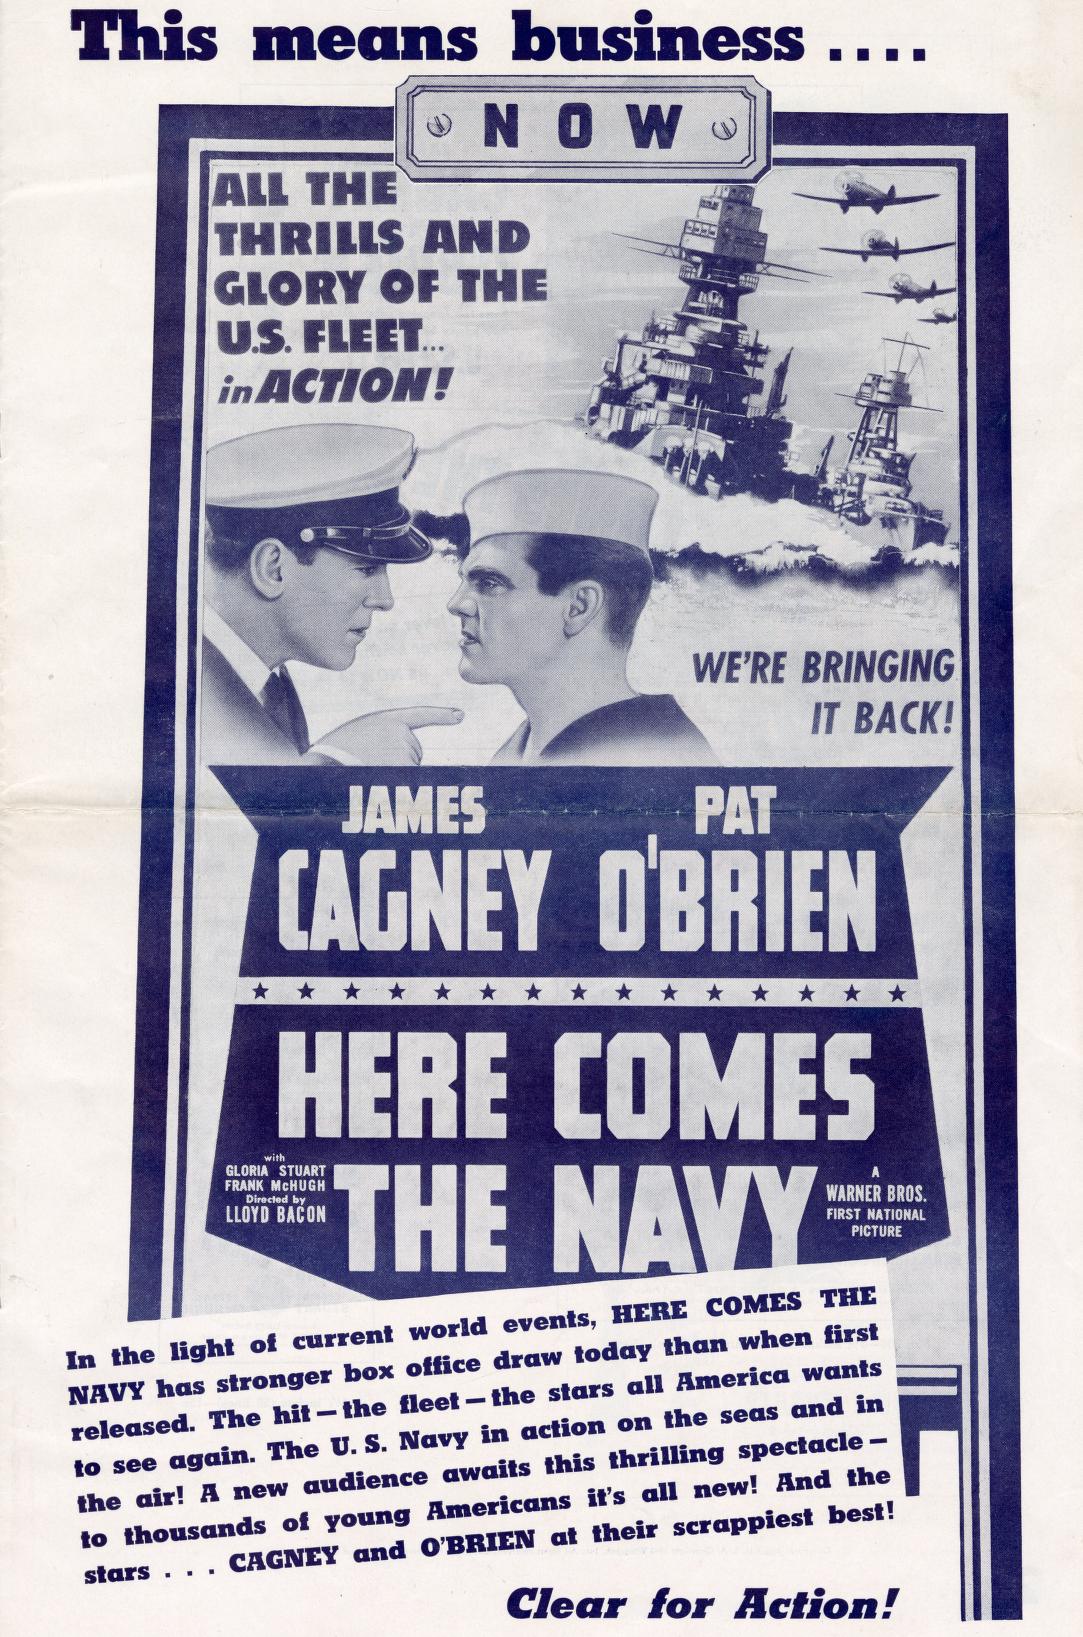 Here Comes the Navy (Warner Bros.)